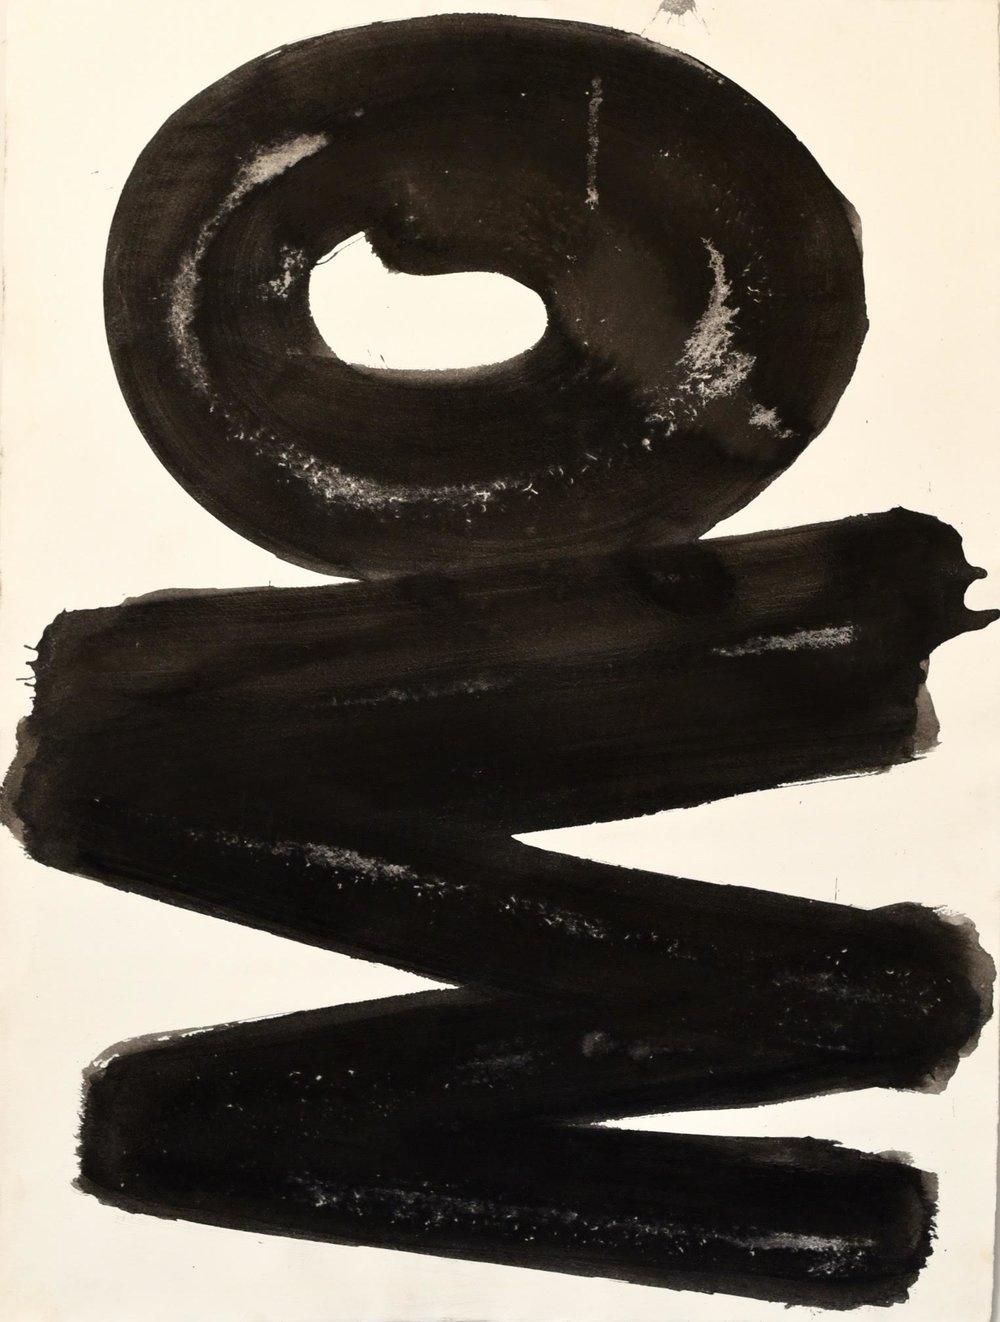 Slivka  Untitled #5, early 70s,  ink on paper, 31 x 23 in, $3000      